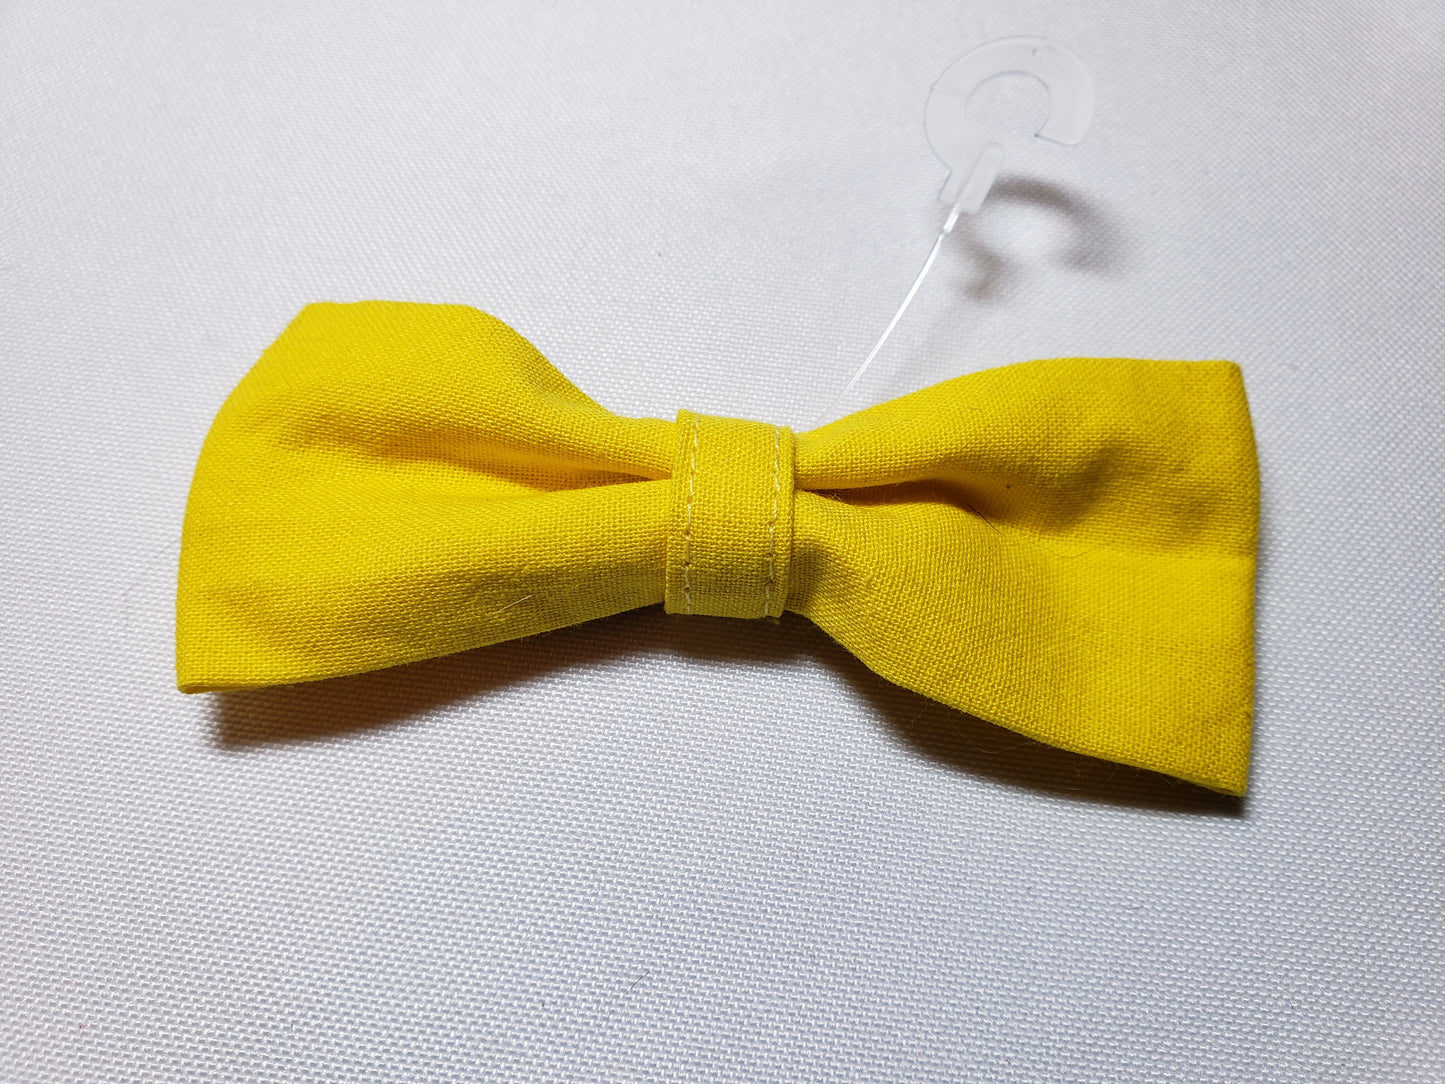 Bright Yellow Over-the-Collar Pet Bow / Bowtie (Old Style)